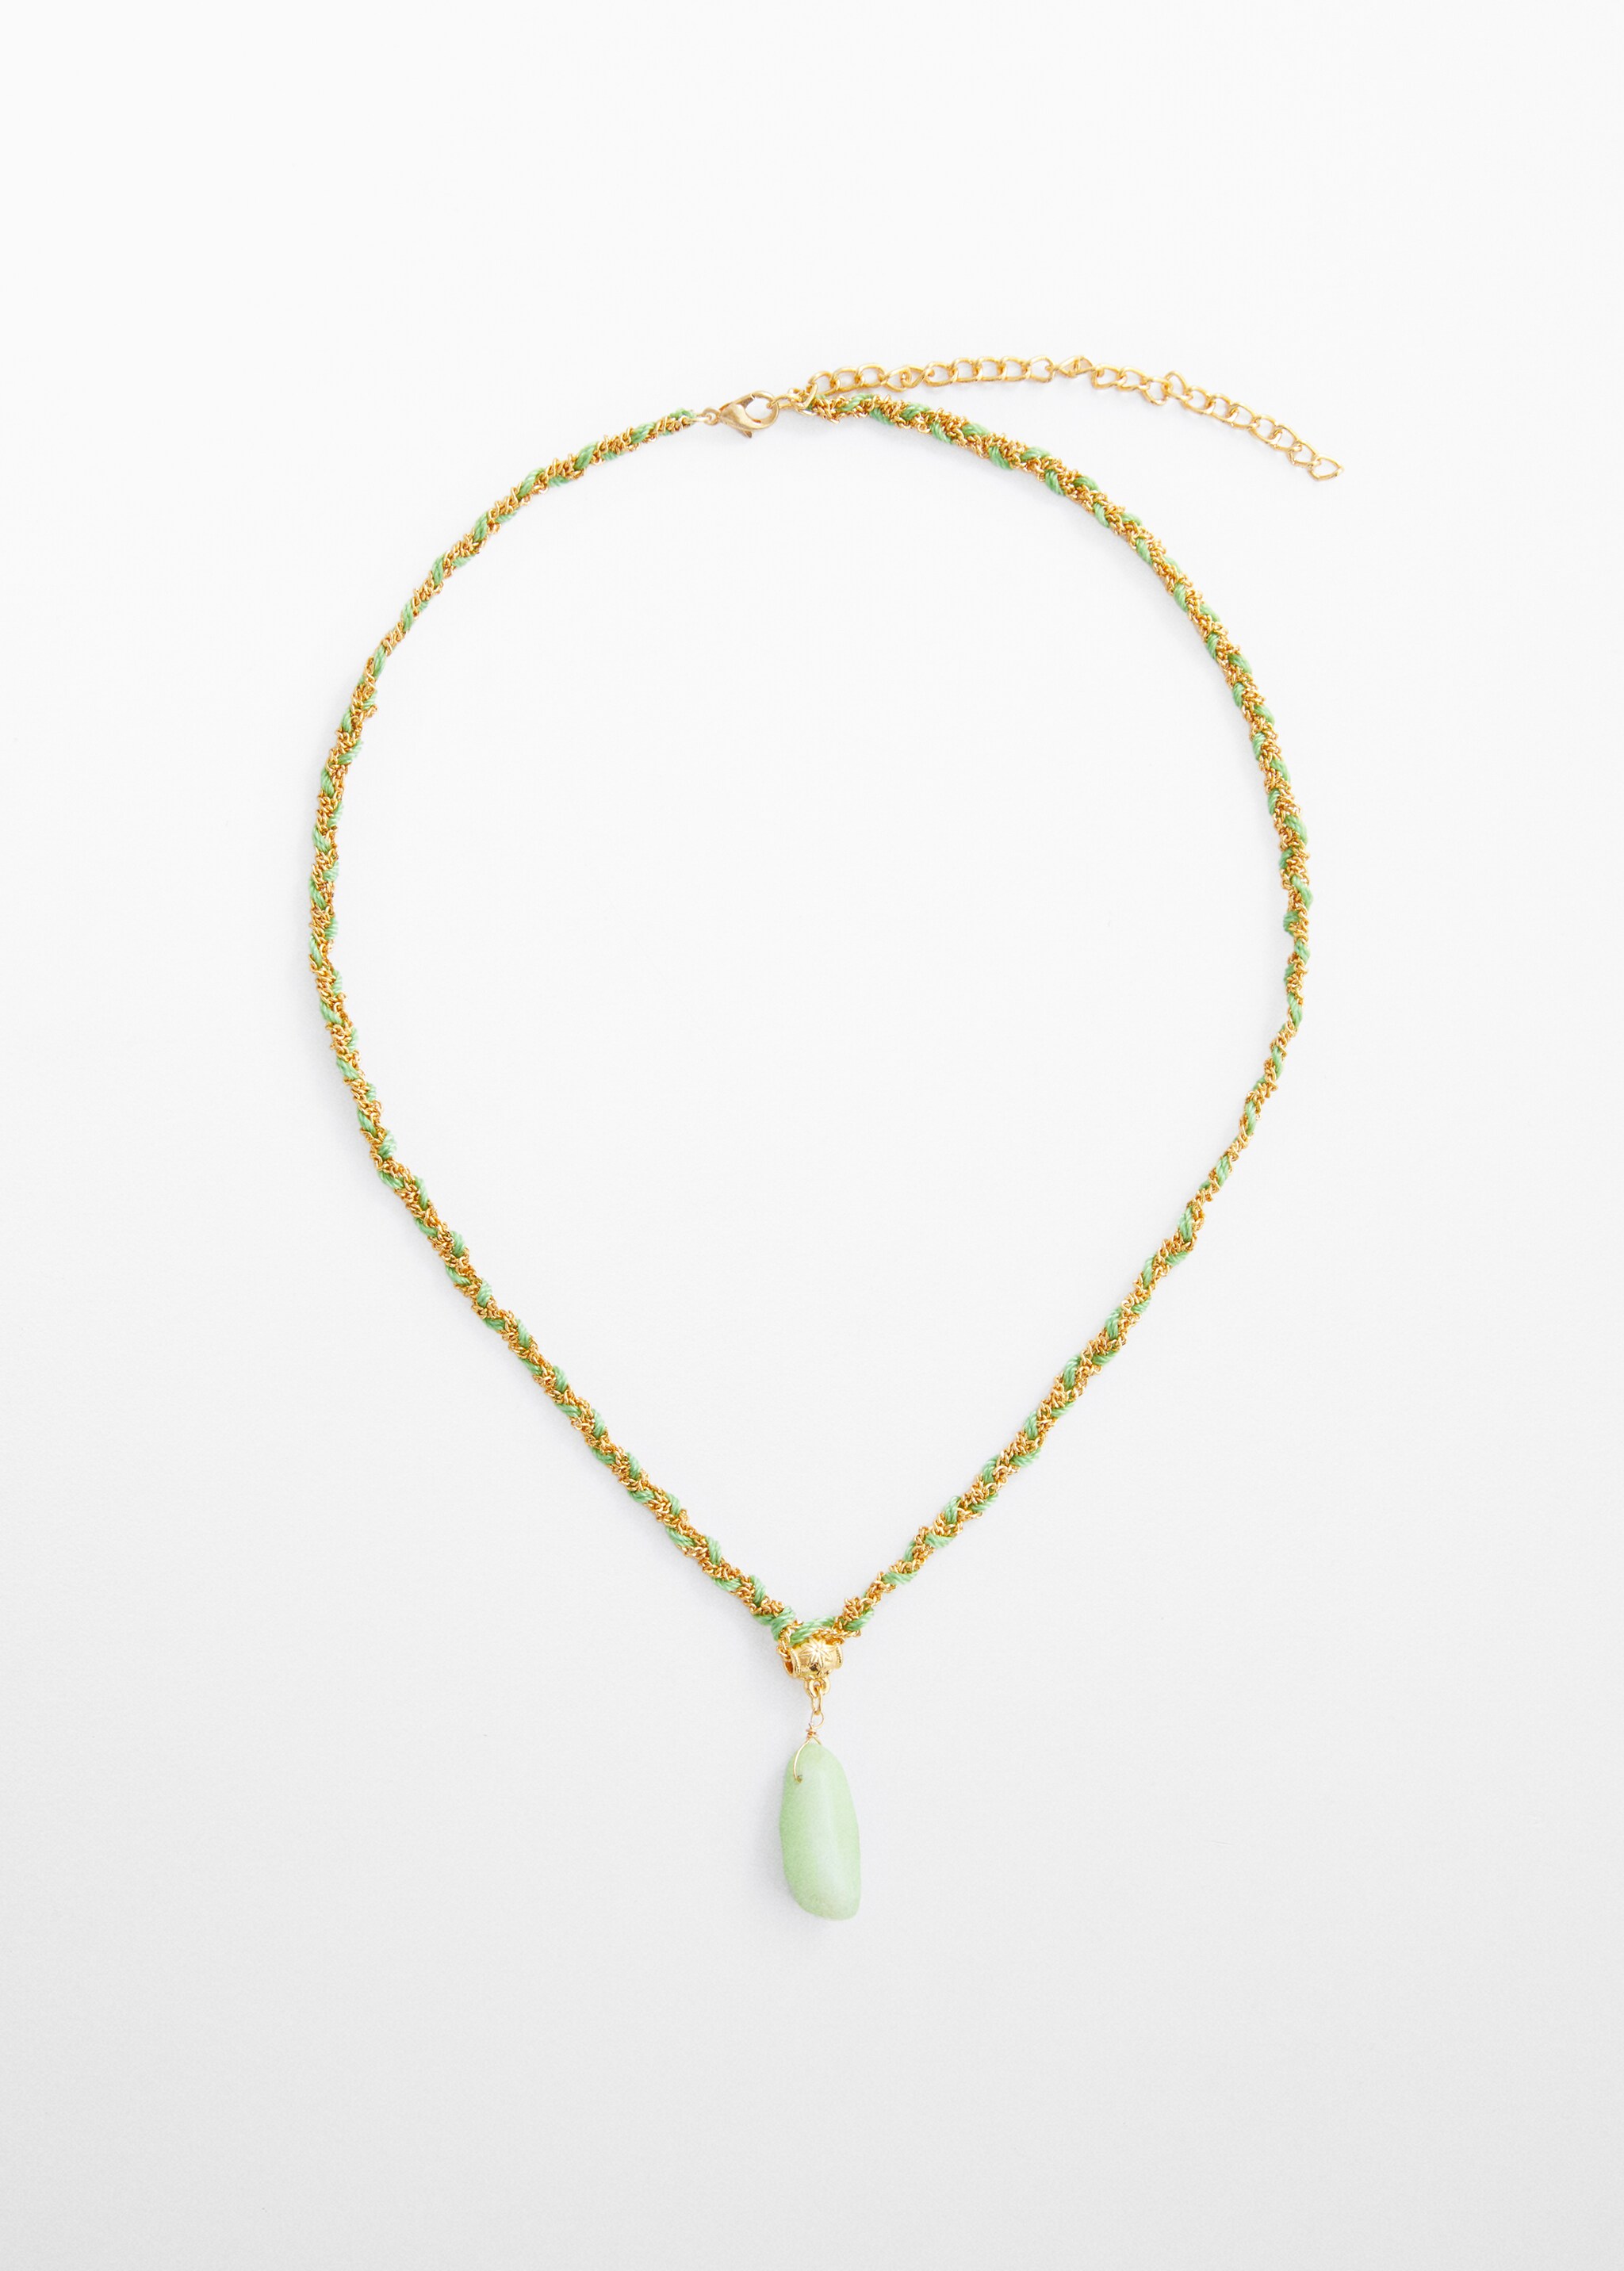 Semi-precious stone combination necklace - Article without model